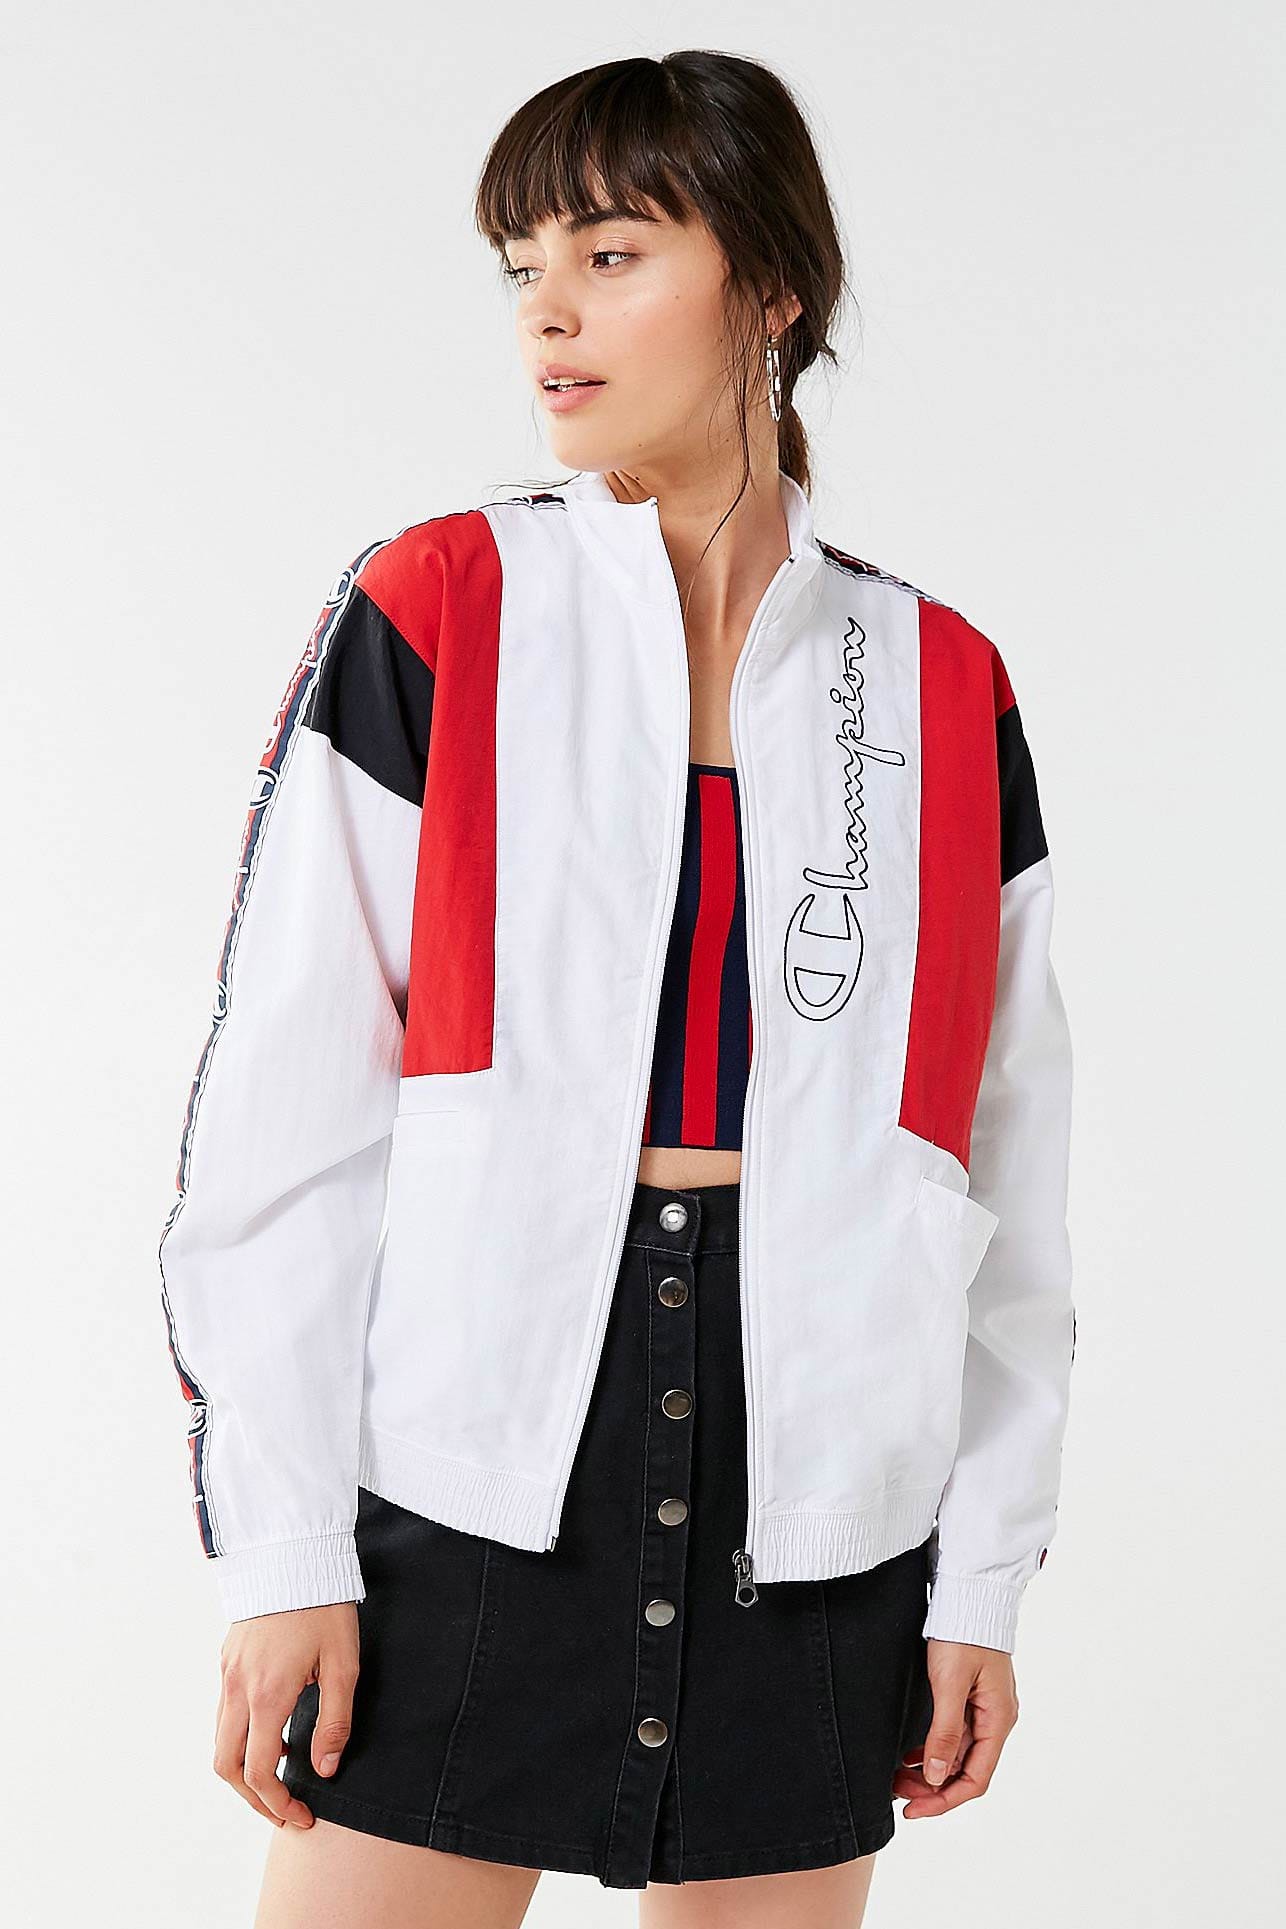 red and white champion jacket